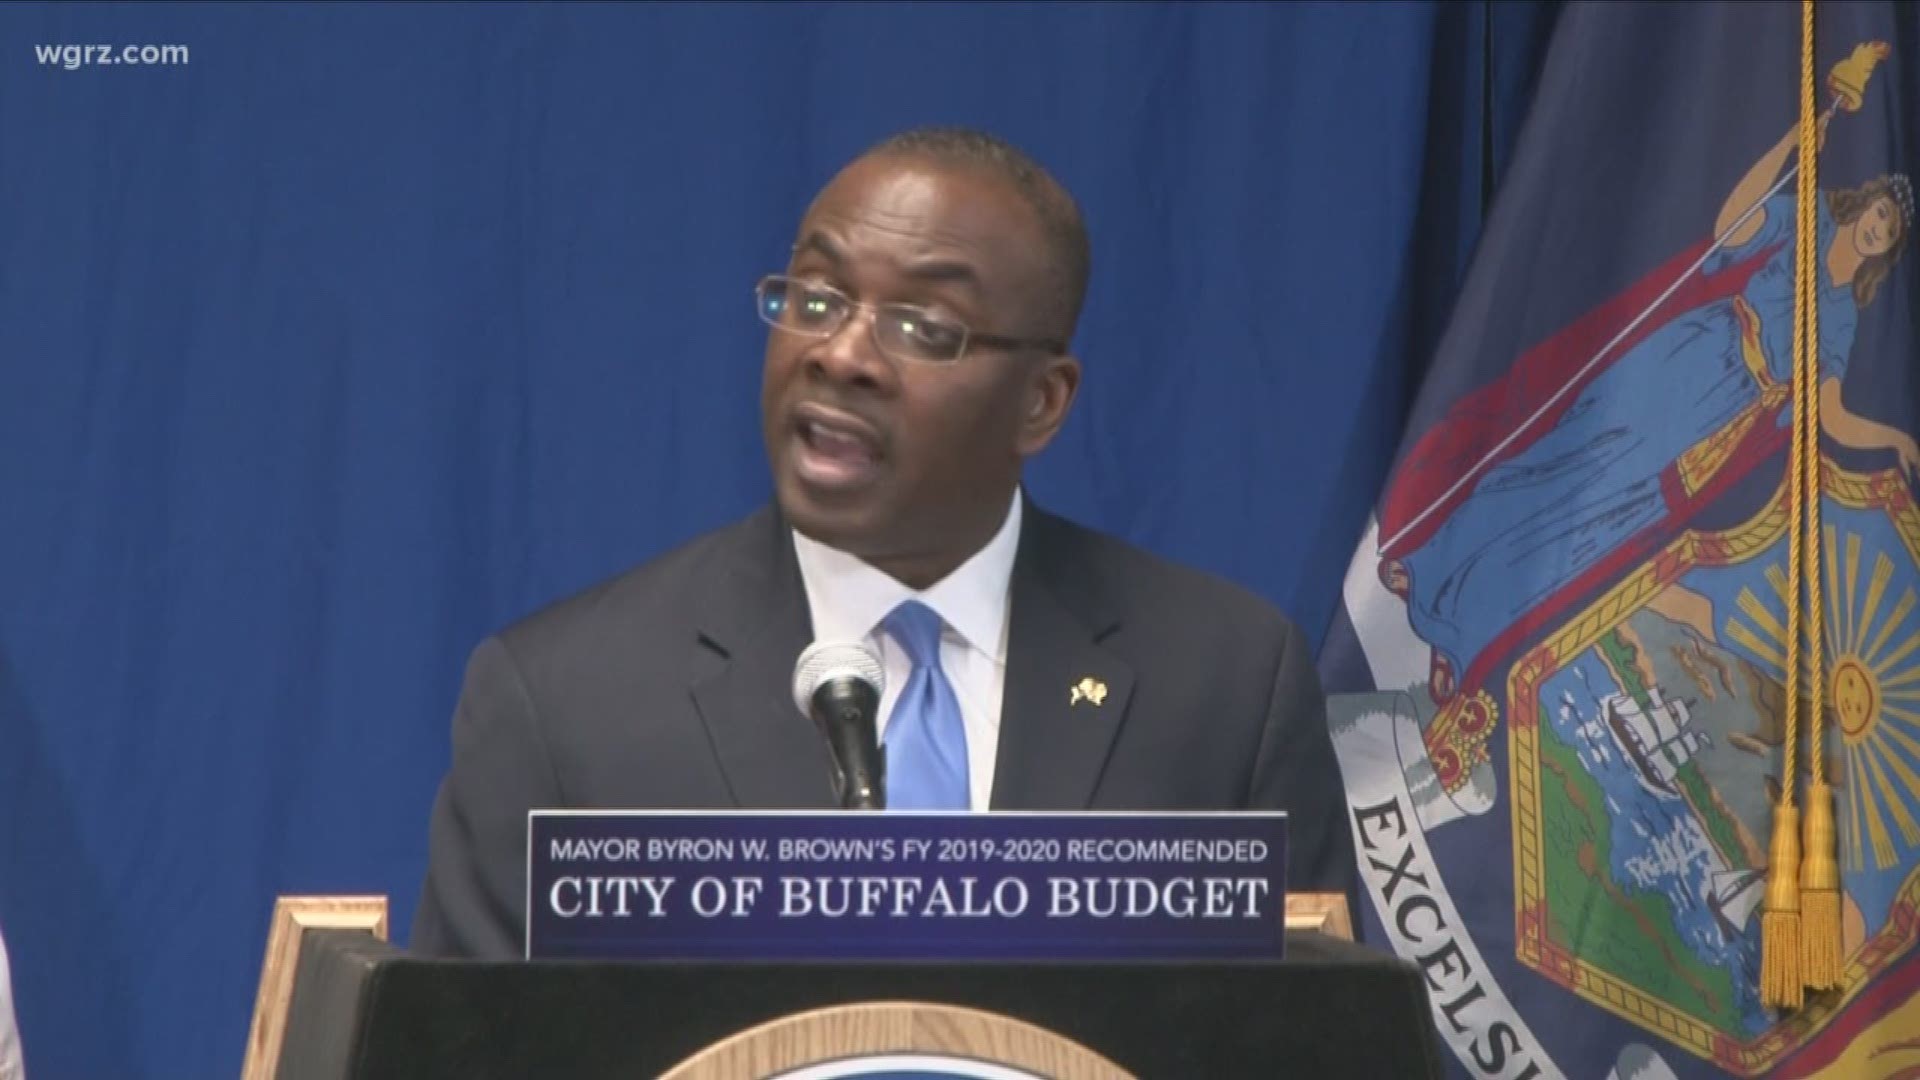 Mayor Byron Brown's budget includes funding for the police department's body camera program.